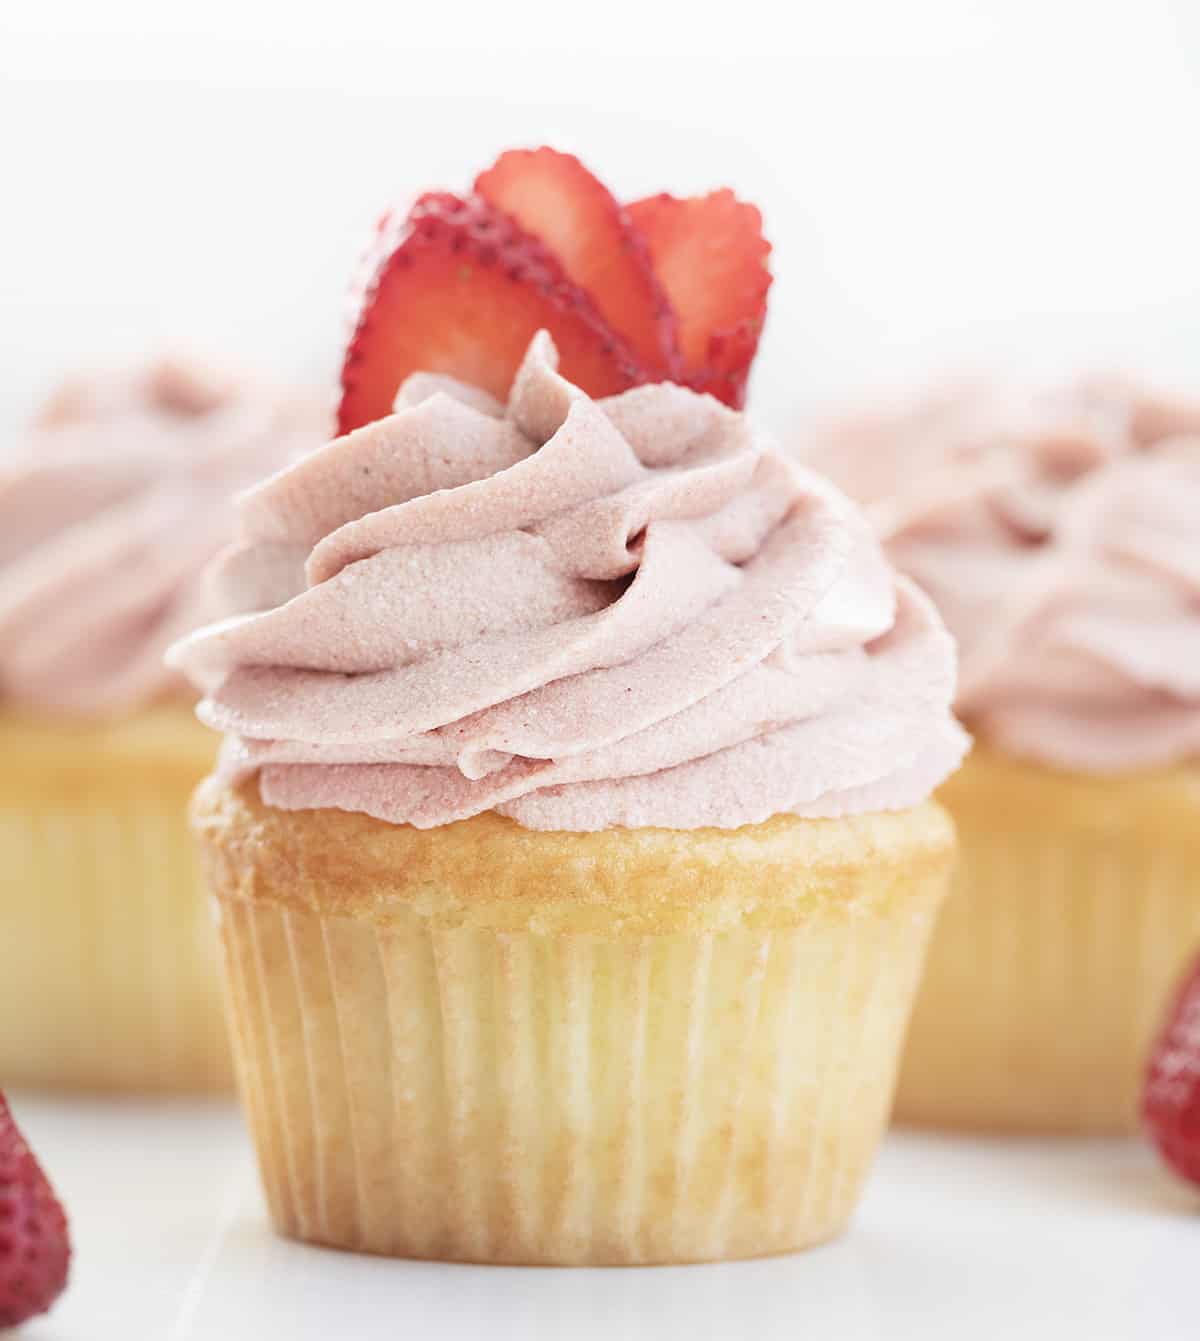 Strawberry Ermine Frosting Piped on a Cupcake with Strawberries.